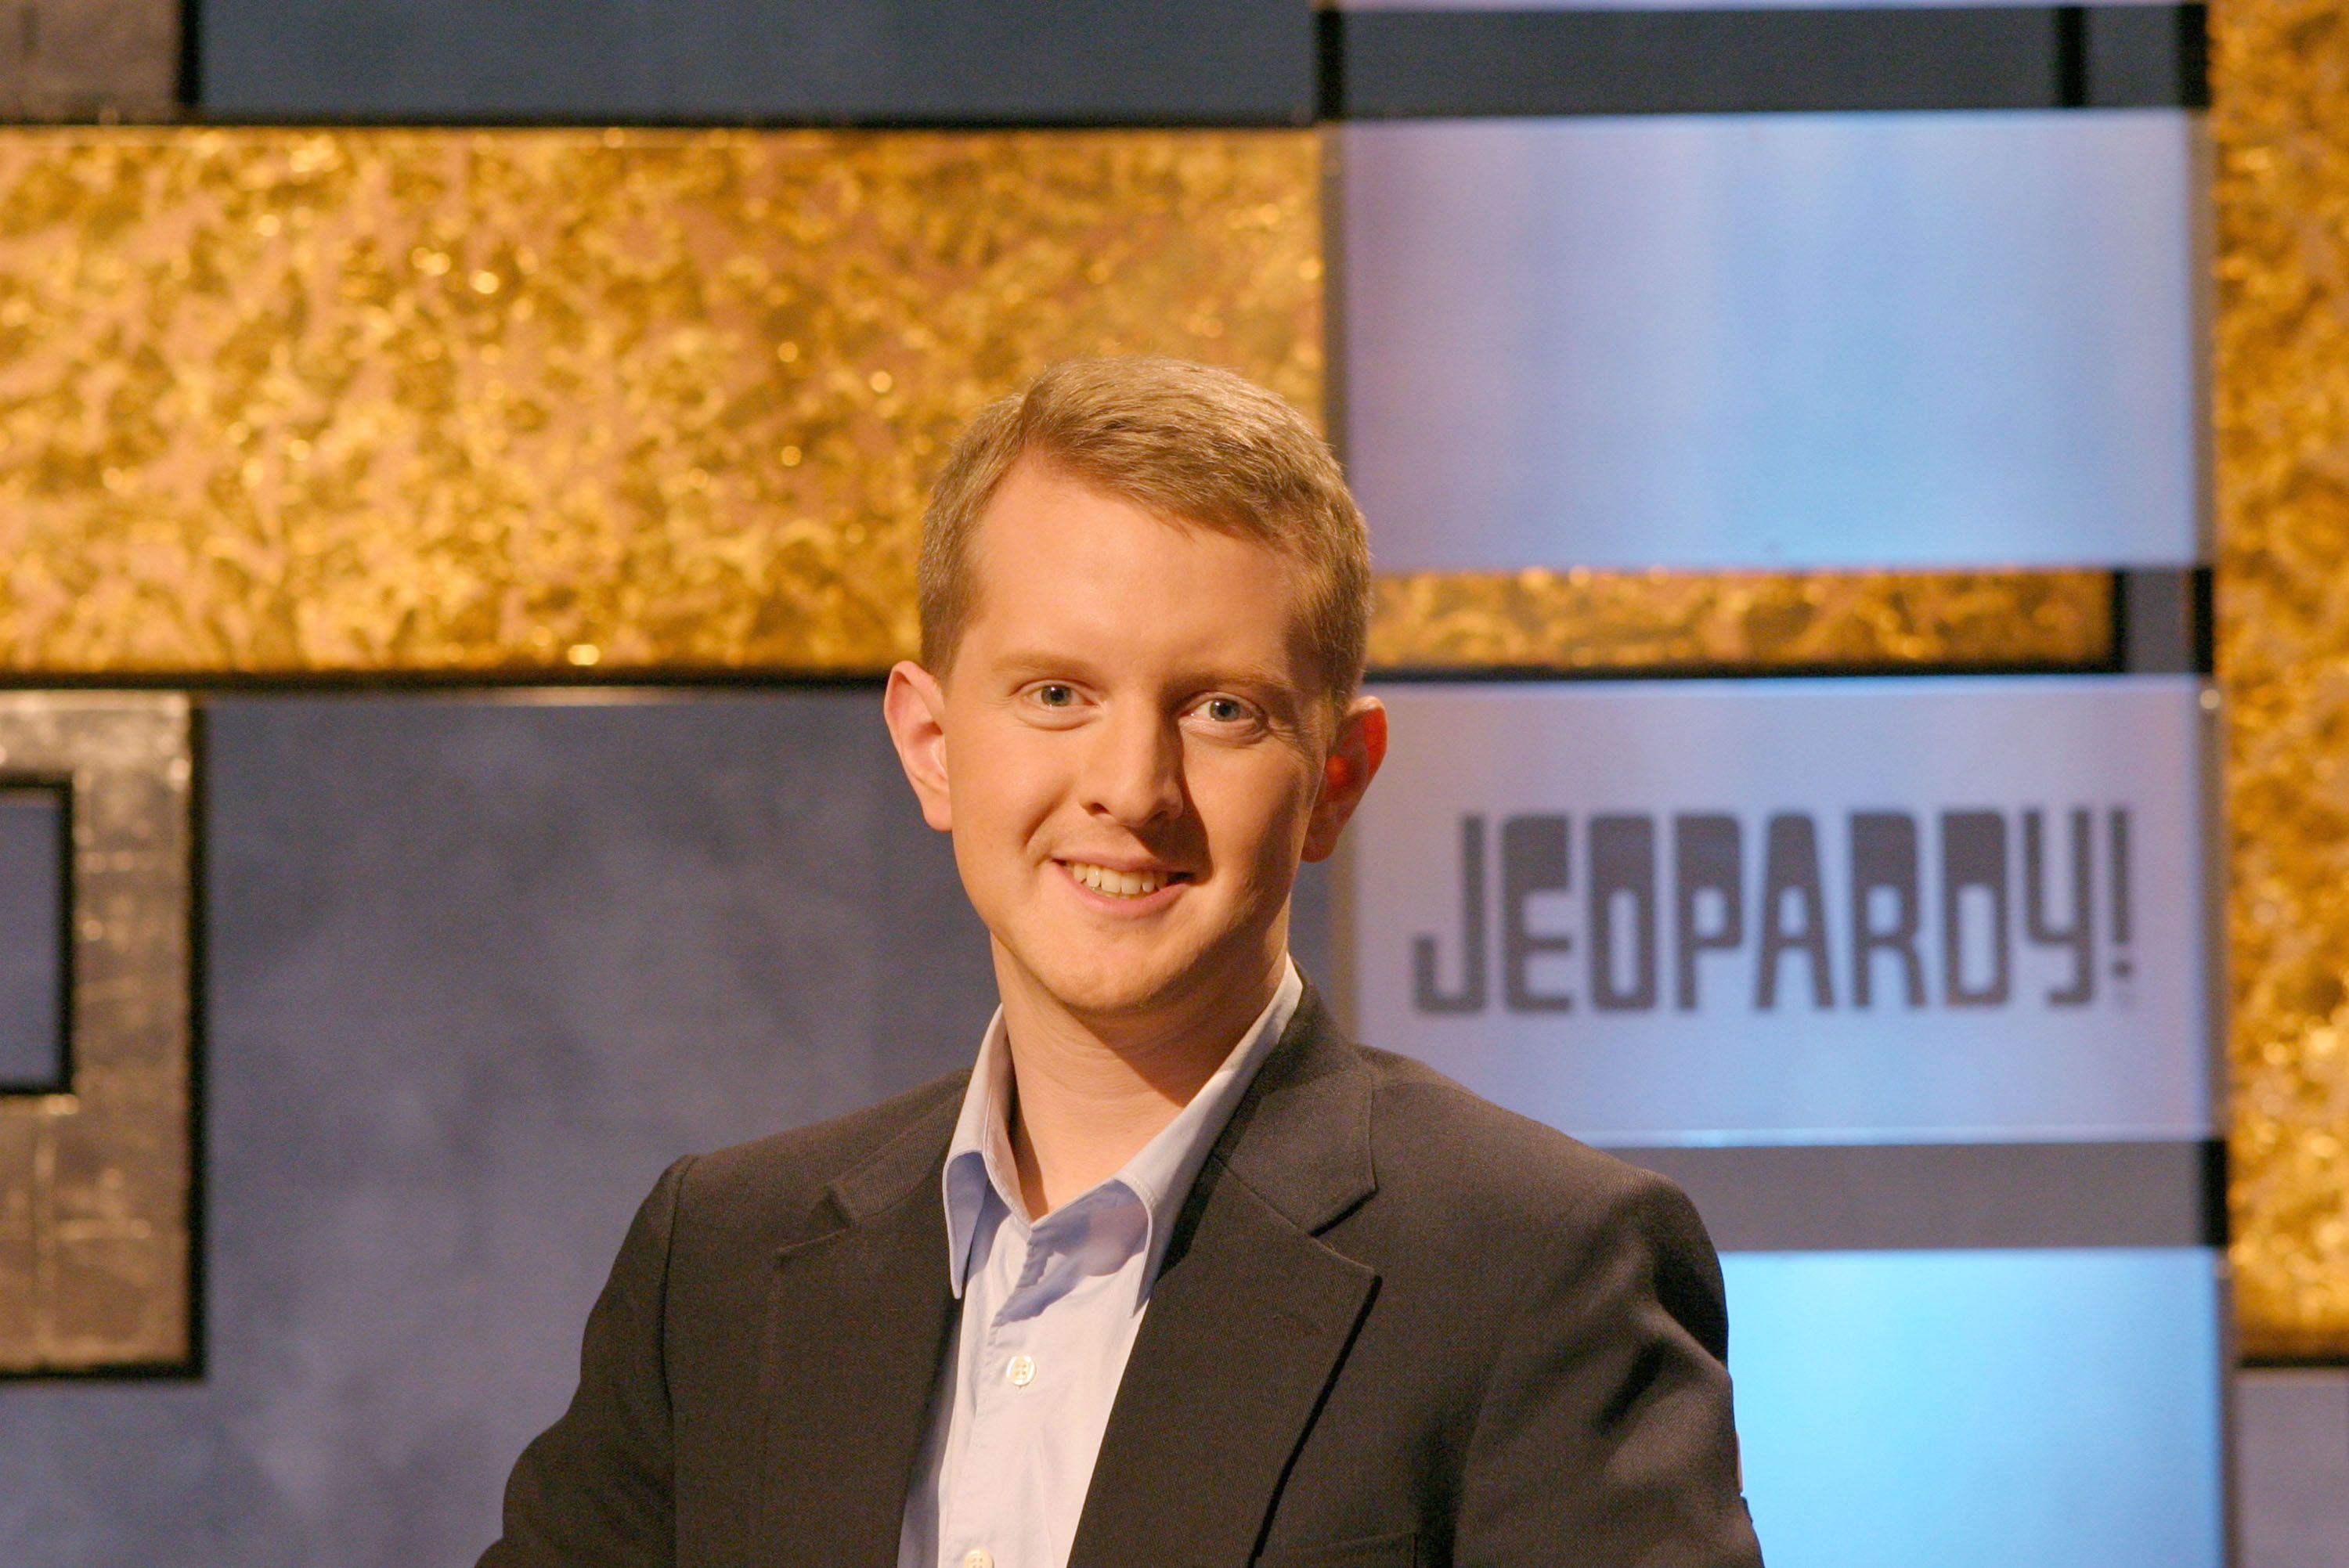 Ken Jennings poses in this undated handout photo on the set of "Jeopardy!" on an episode broadcast on November 30, 2004 | Photo: Getty Images